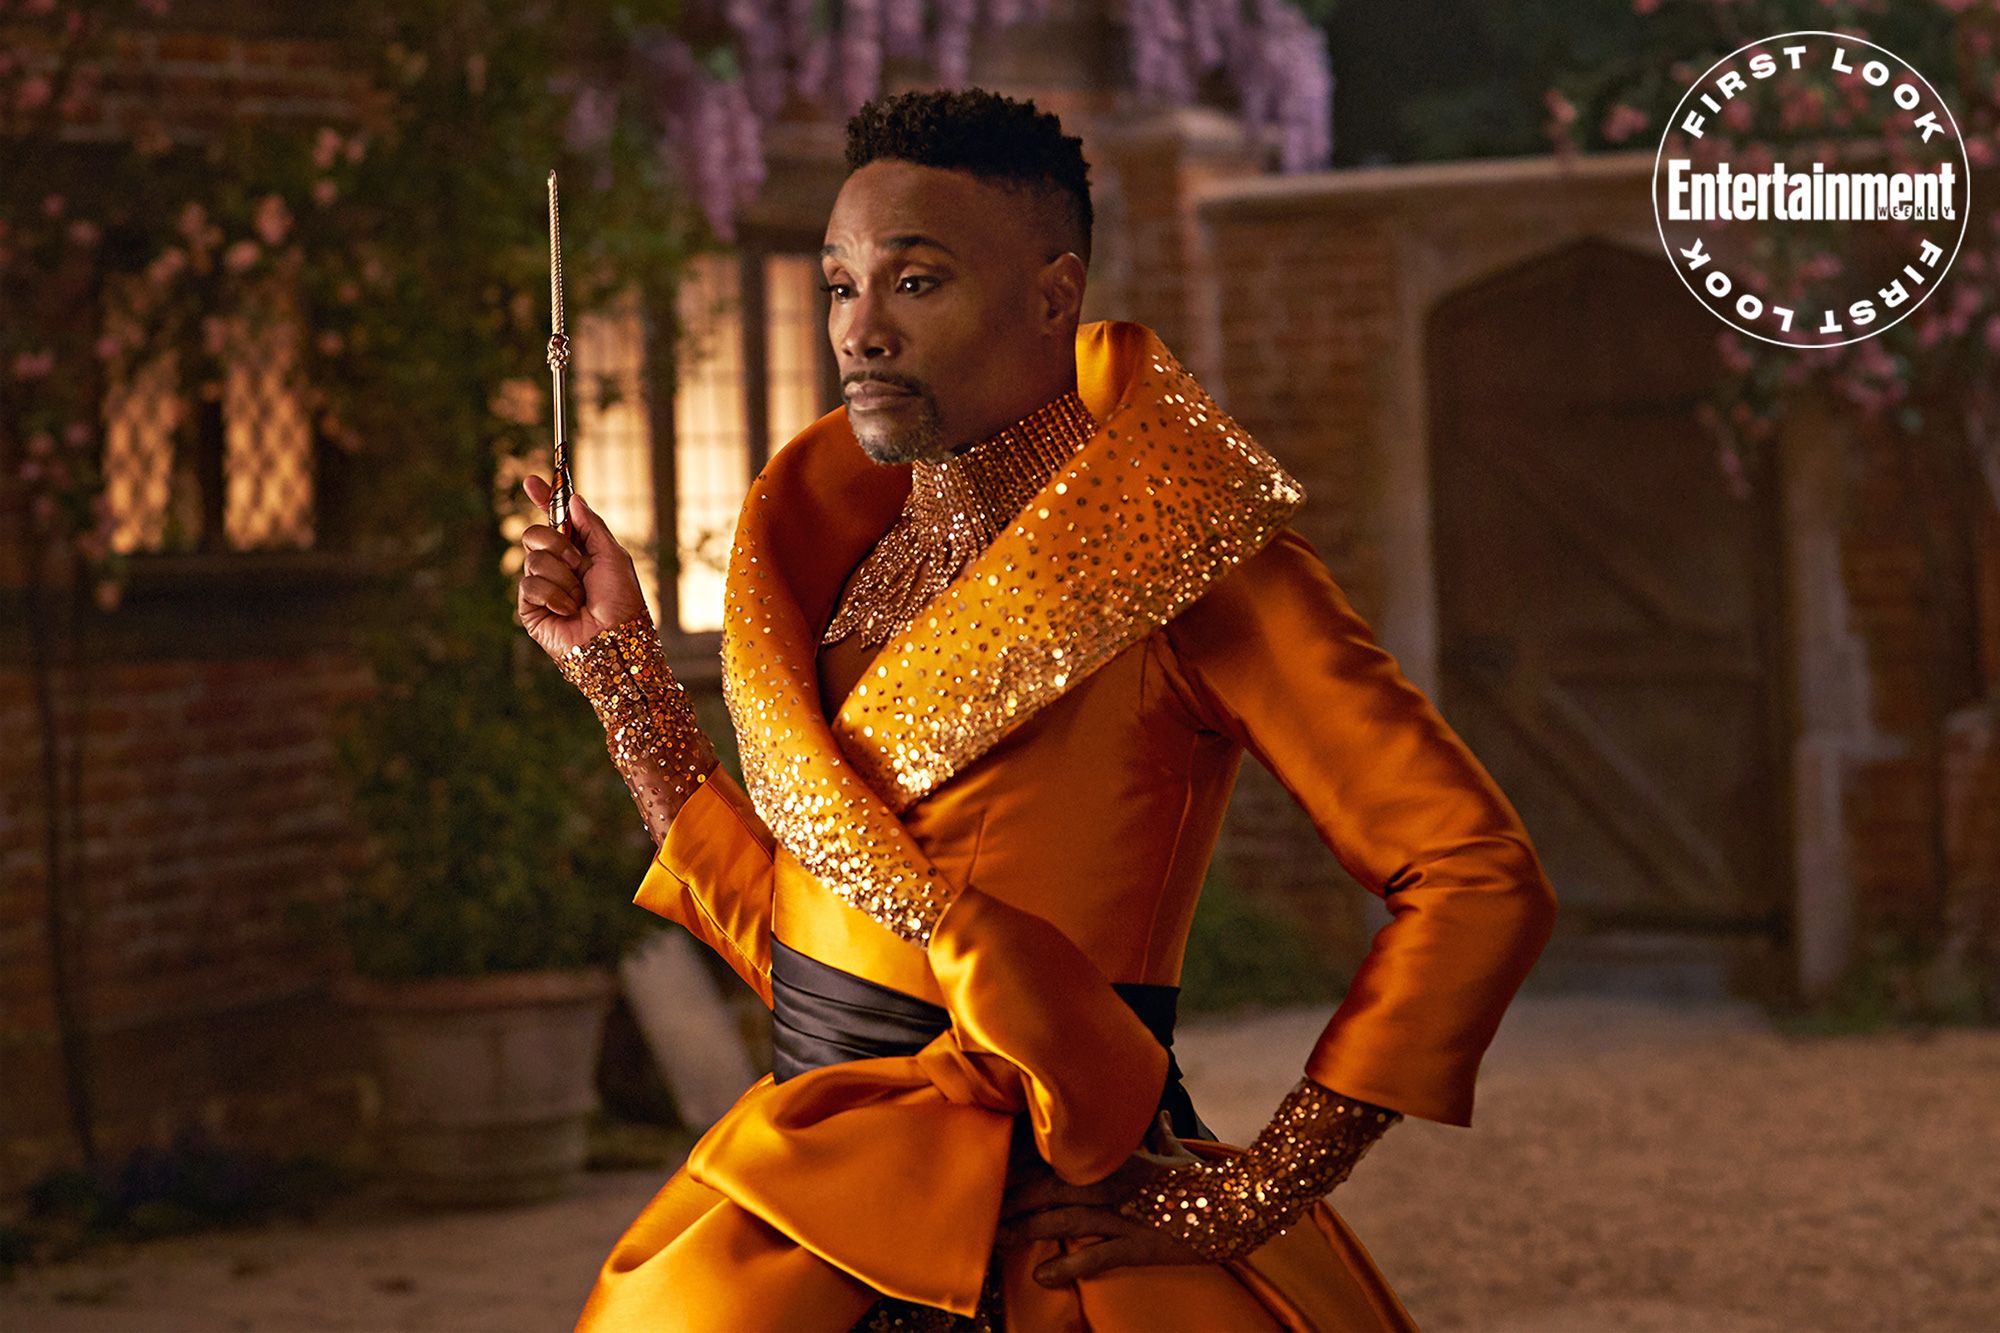 Cinderella 2021 Movie Image Reveals First Look At Billy Porter As The Fairy Godmother